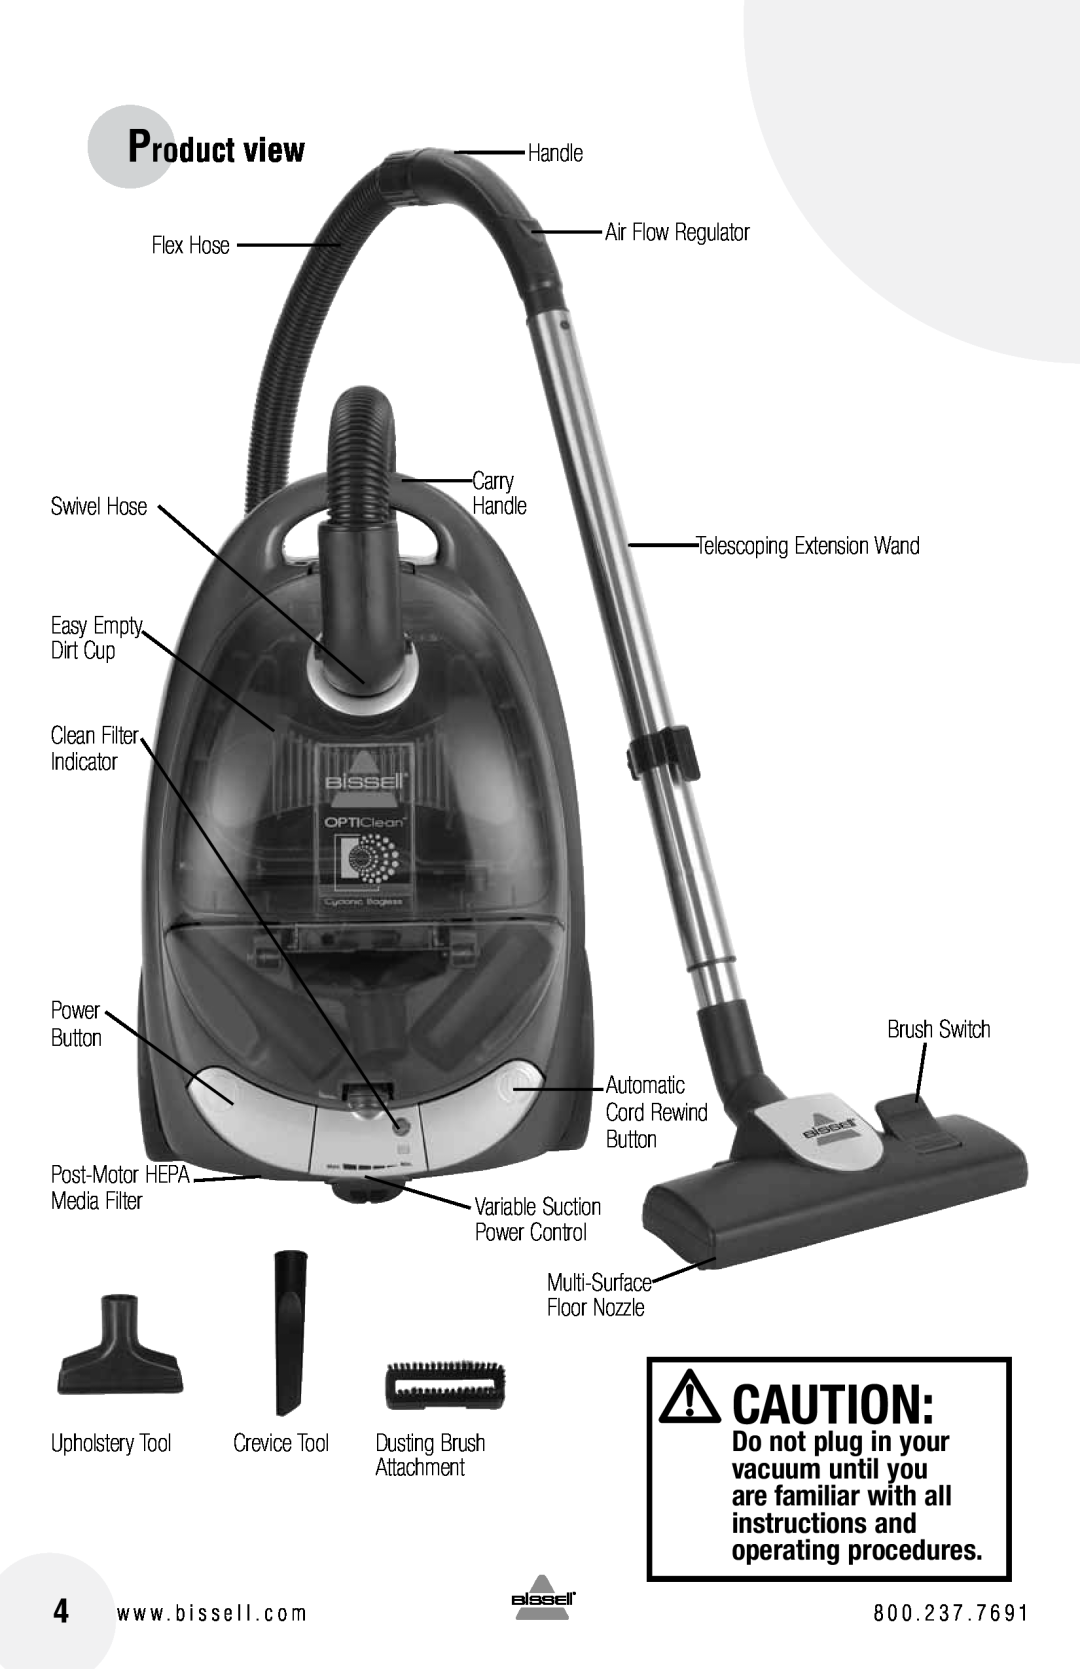 Bissell 66T6 Product view, Do not plug in your, vacuum until you, are familiar with all, instructions and, Multi-Surface 